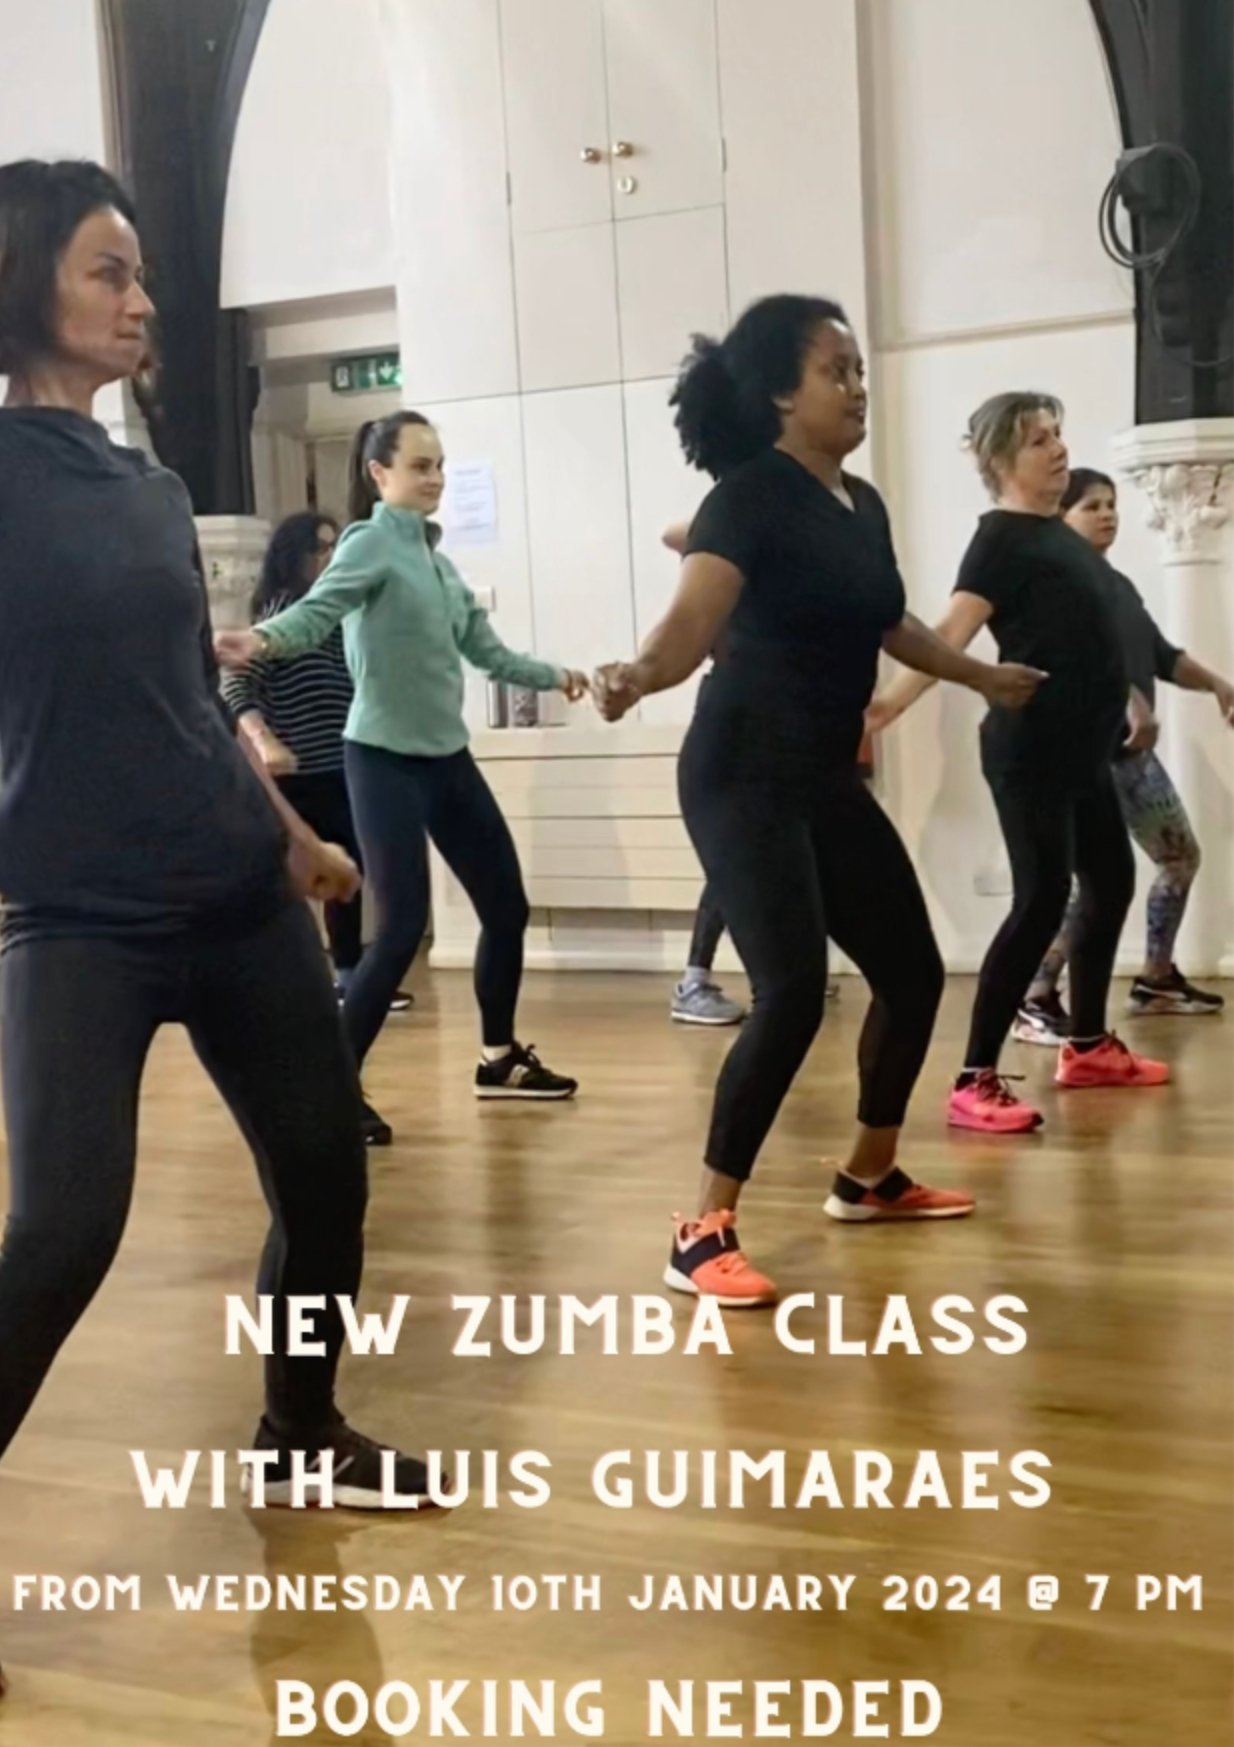 ZUMBA LESSON IN HAMMERSMITH & CHISWICK EVERY WEDNESDAY @ 7PM